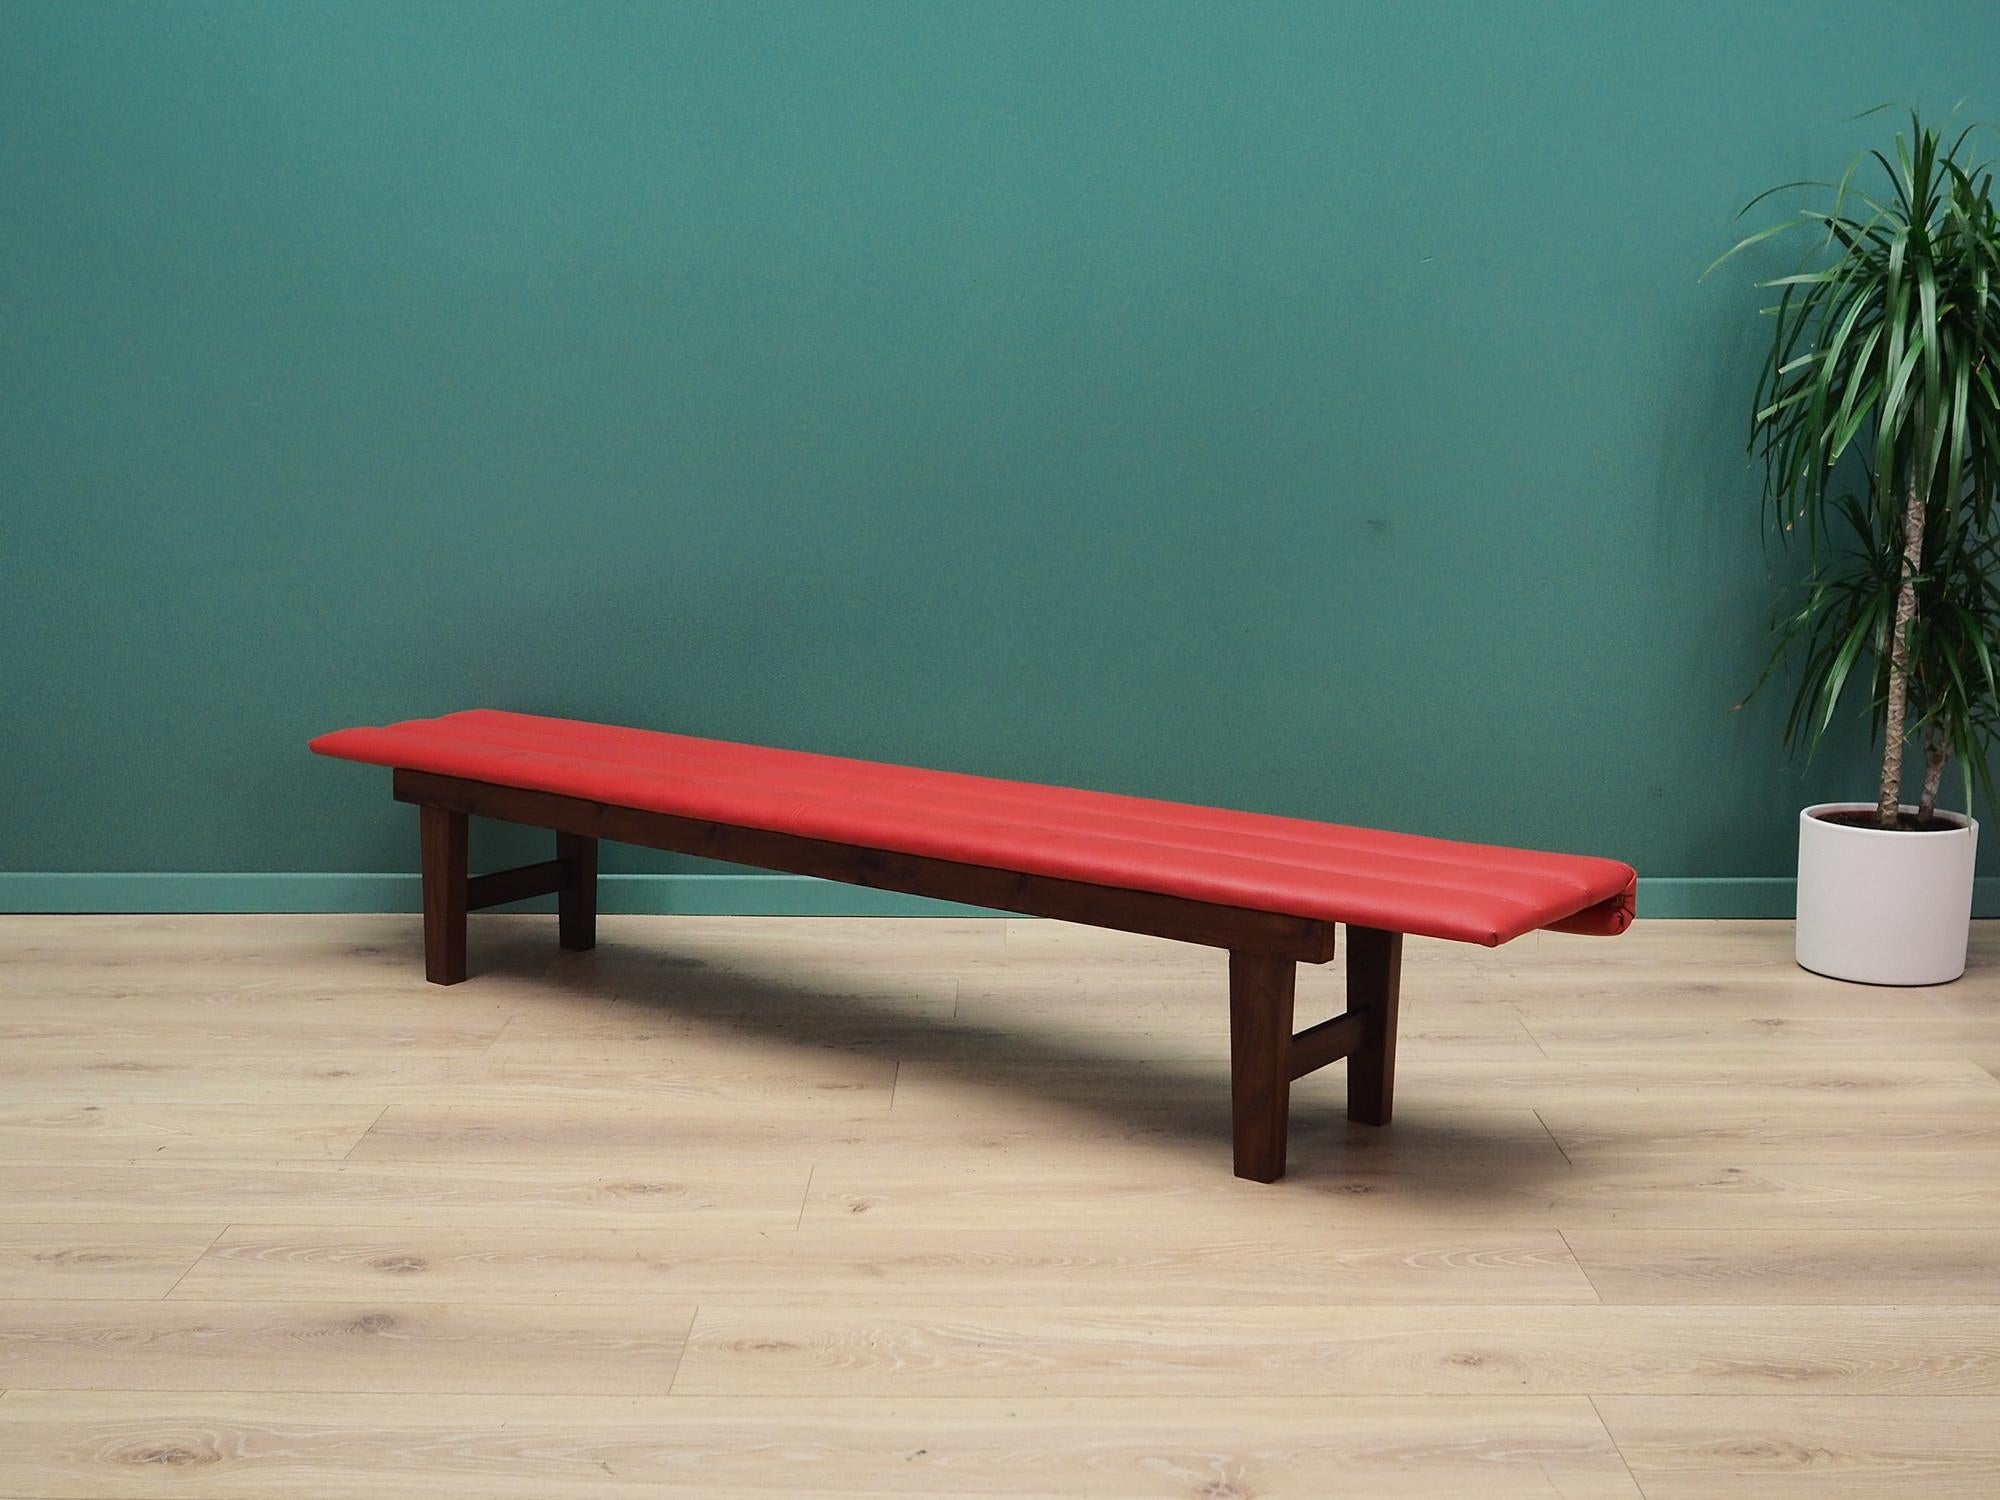 Scandinavian Modern Bench Red Eco-Leather, Danish Design, 1990s For Sale